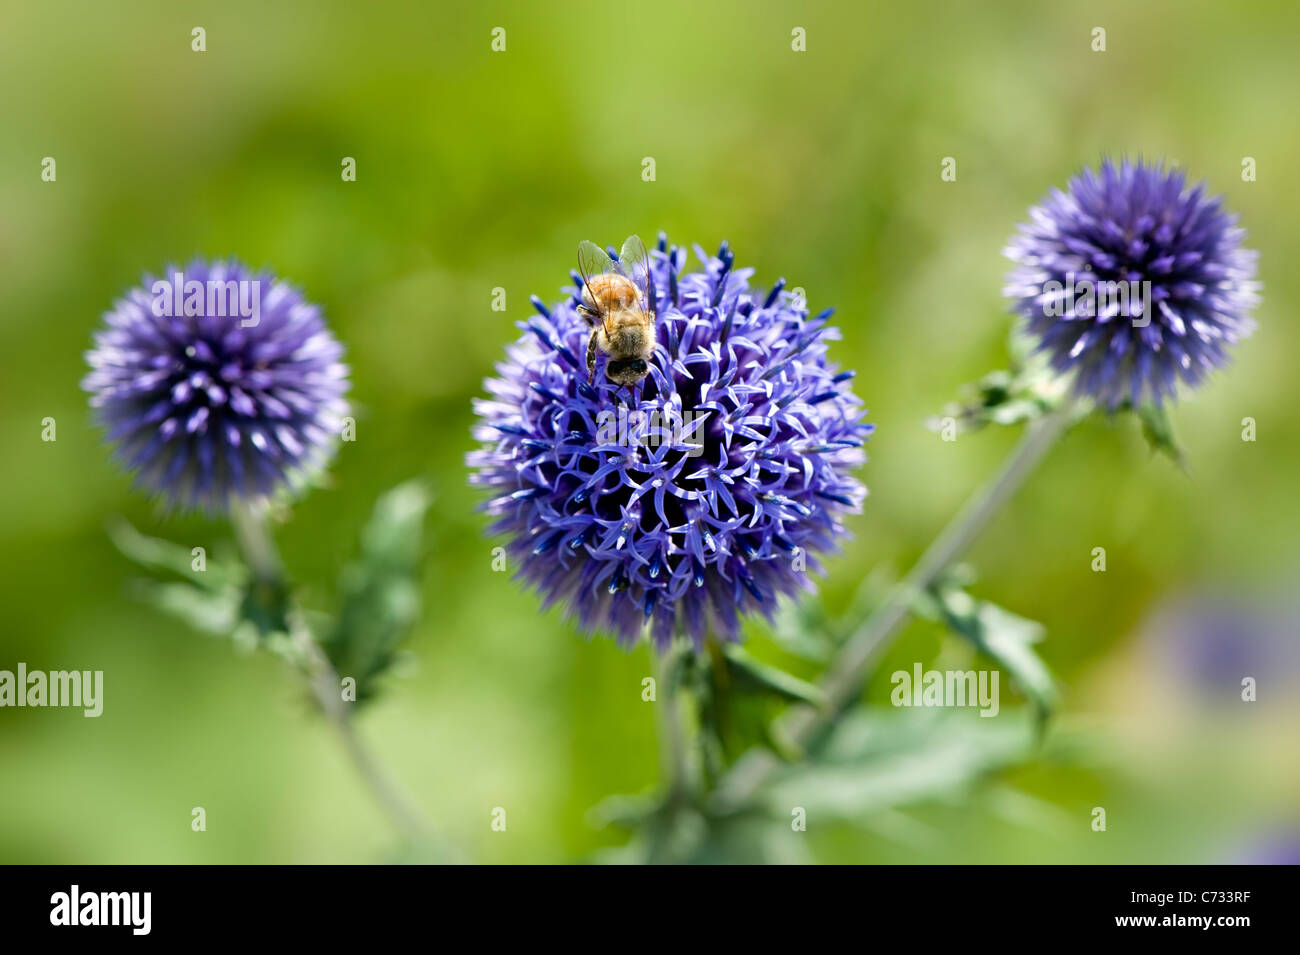 Echinops Ritro Veitch's Blue - small globe thistle flower head with a small honey bee collecting pollen. Stock Photo